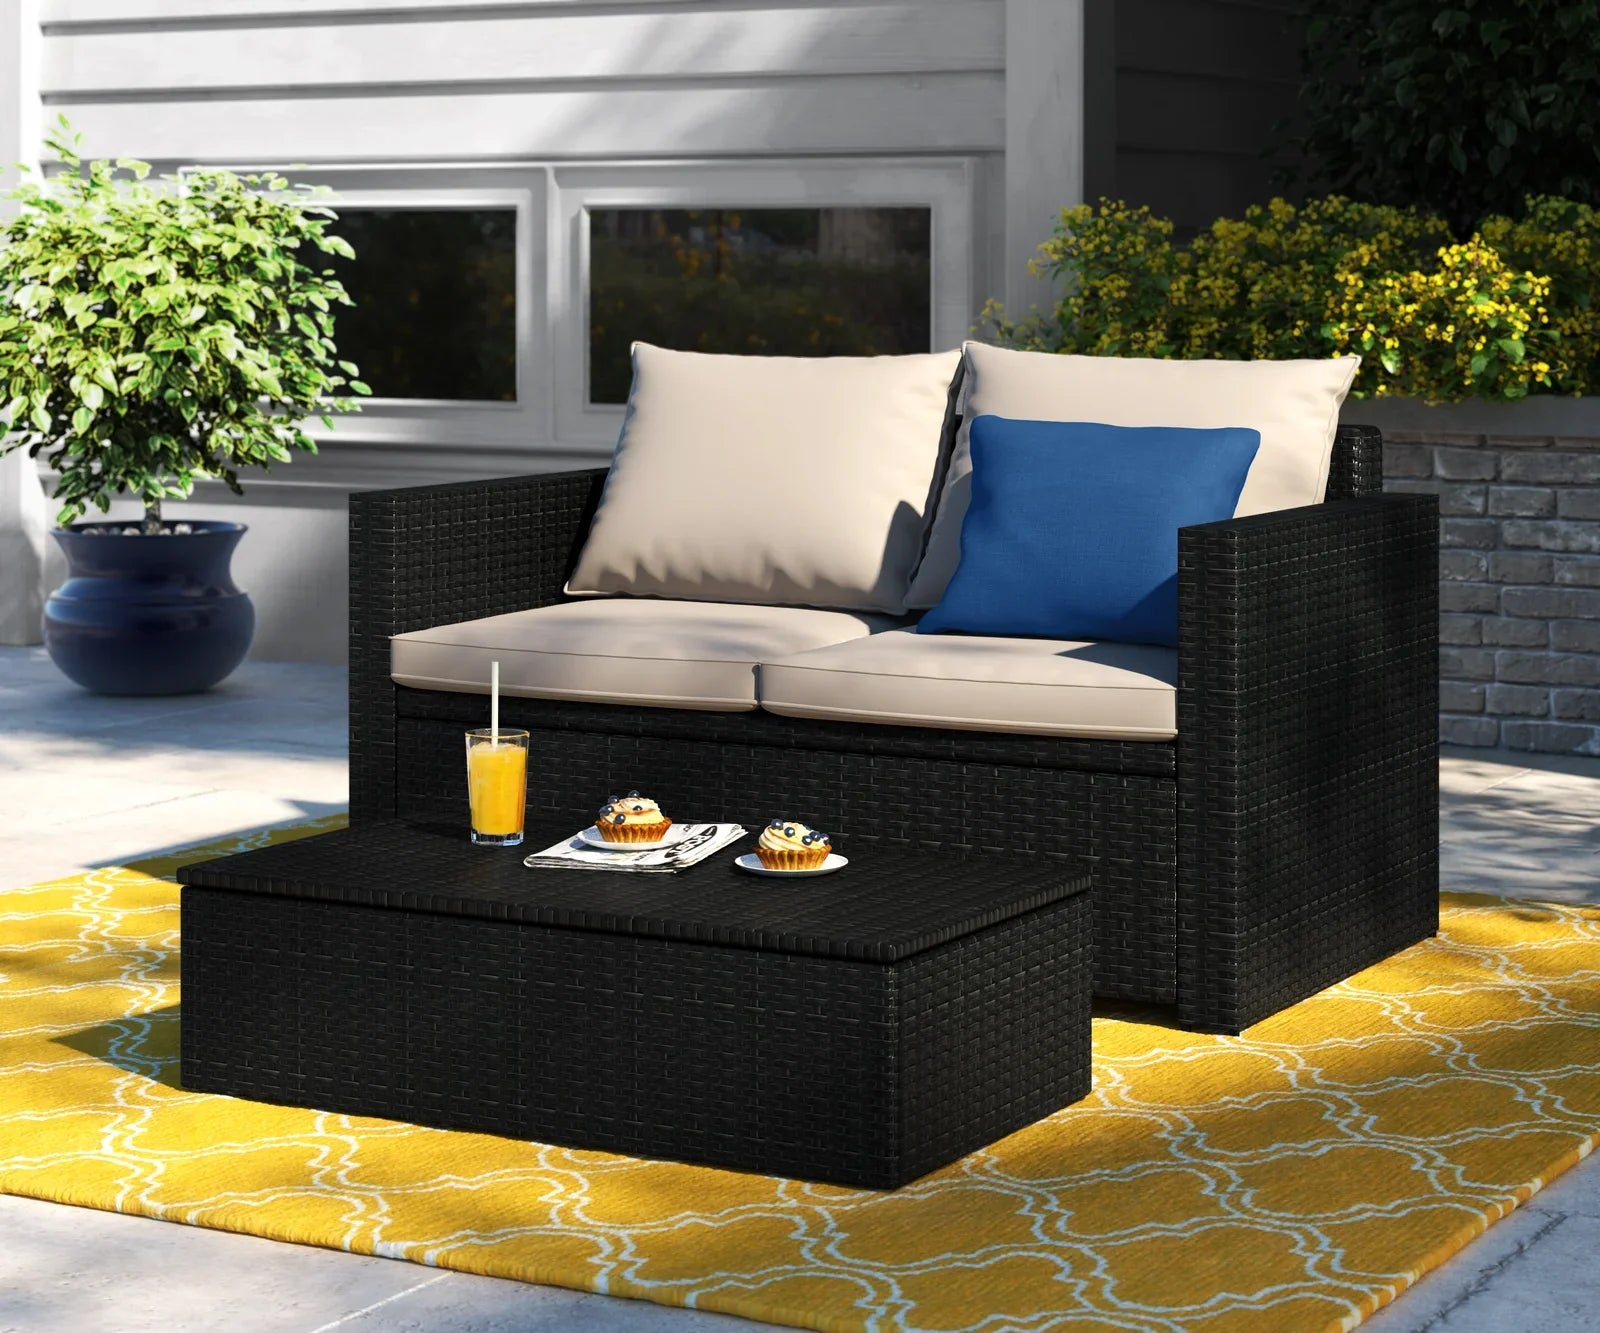 OUTDOOR SOFA SET 2 SEATER AND 1 CENTER TABLE